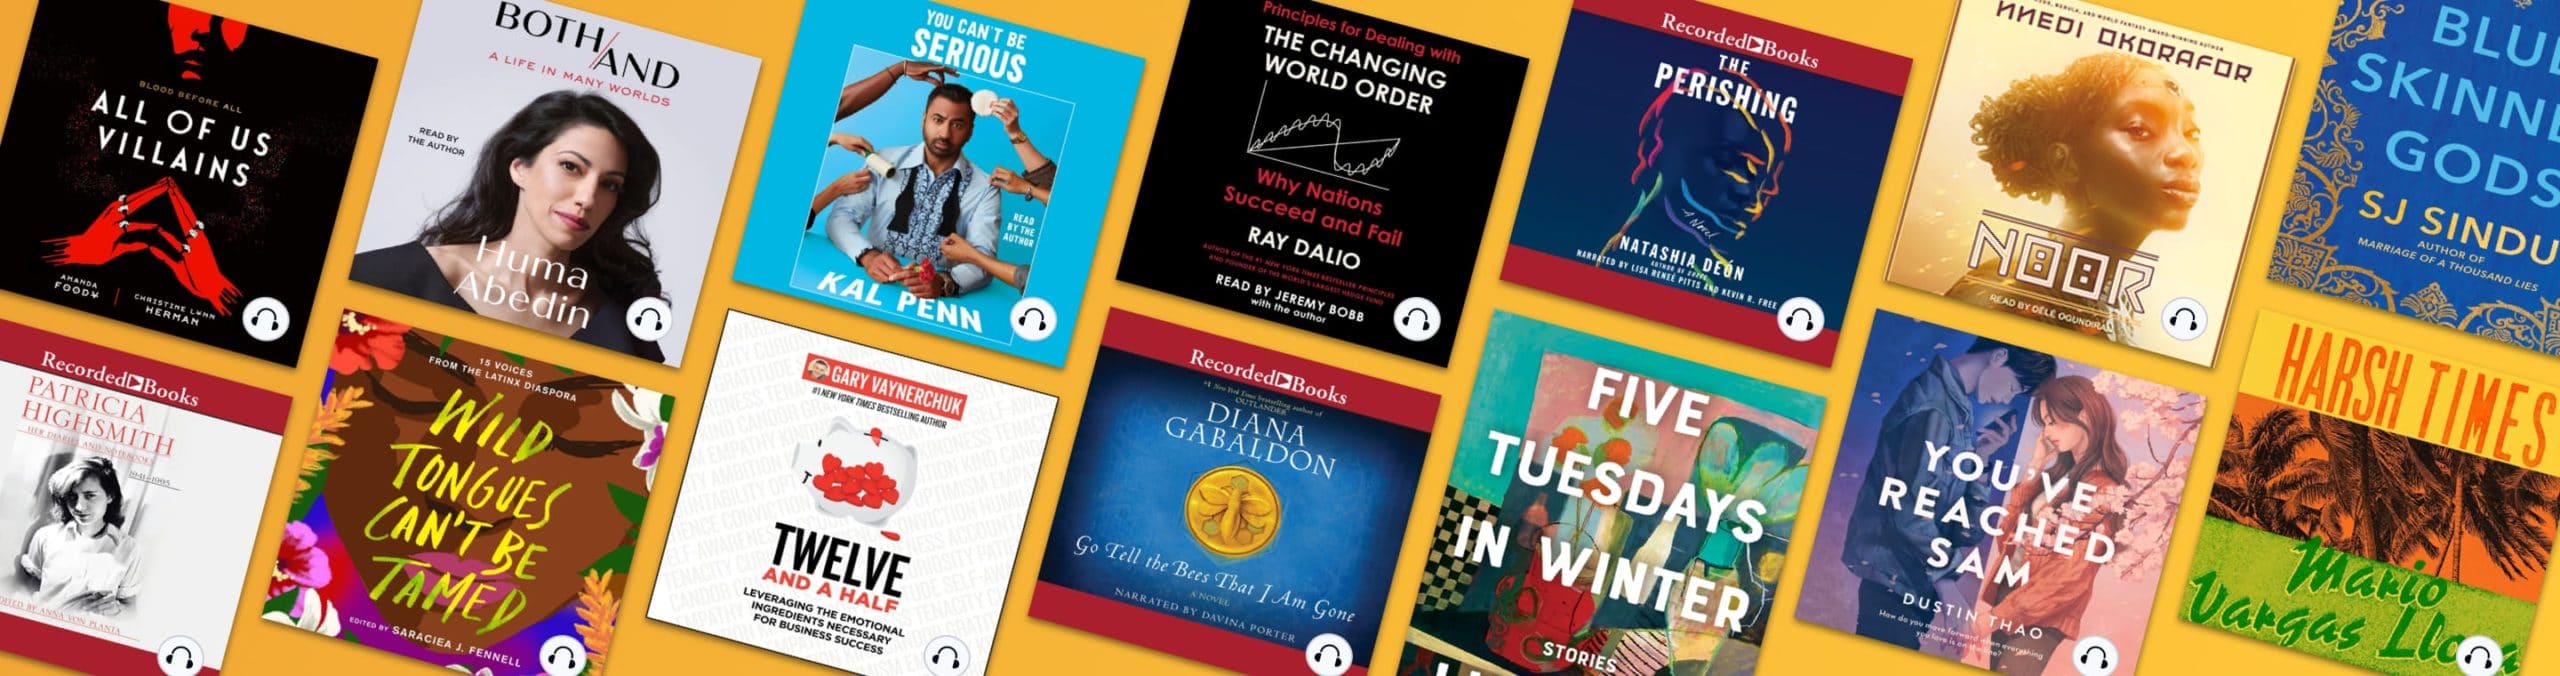 Novemberâ€™s Best New Books, From Ray Dalio to Outlander